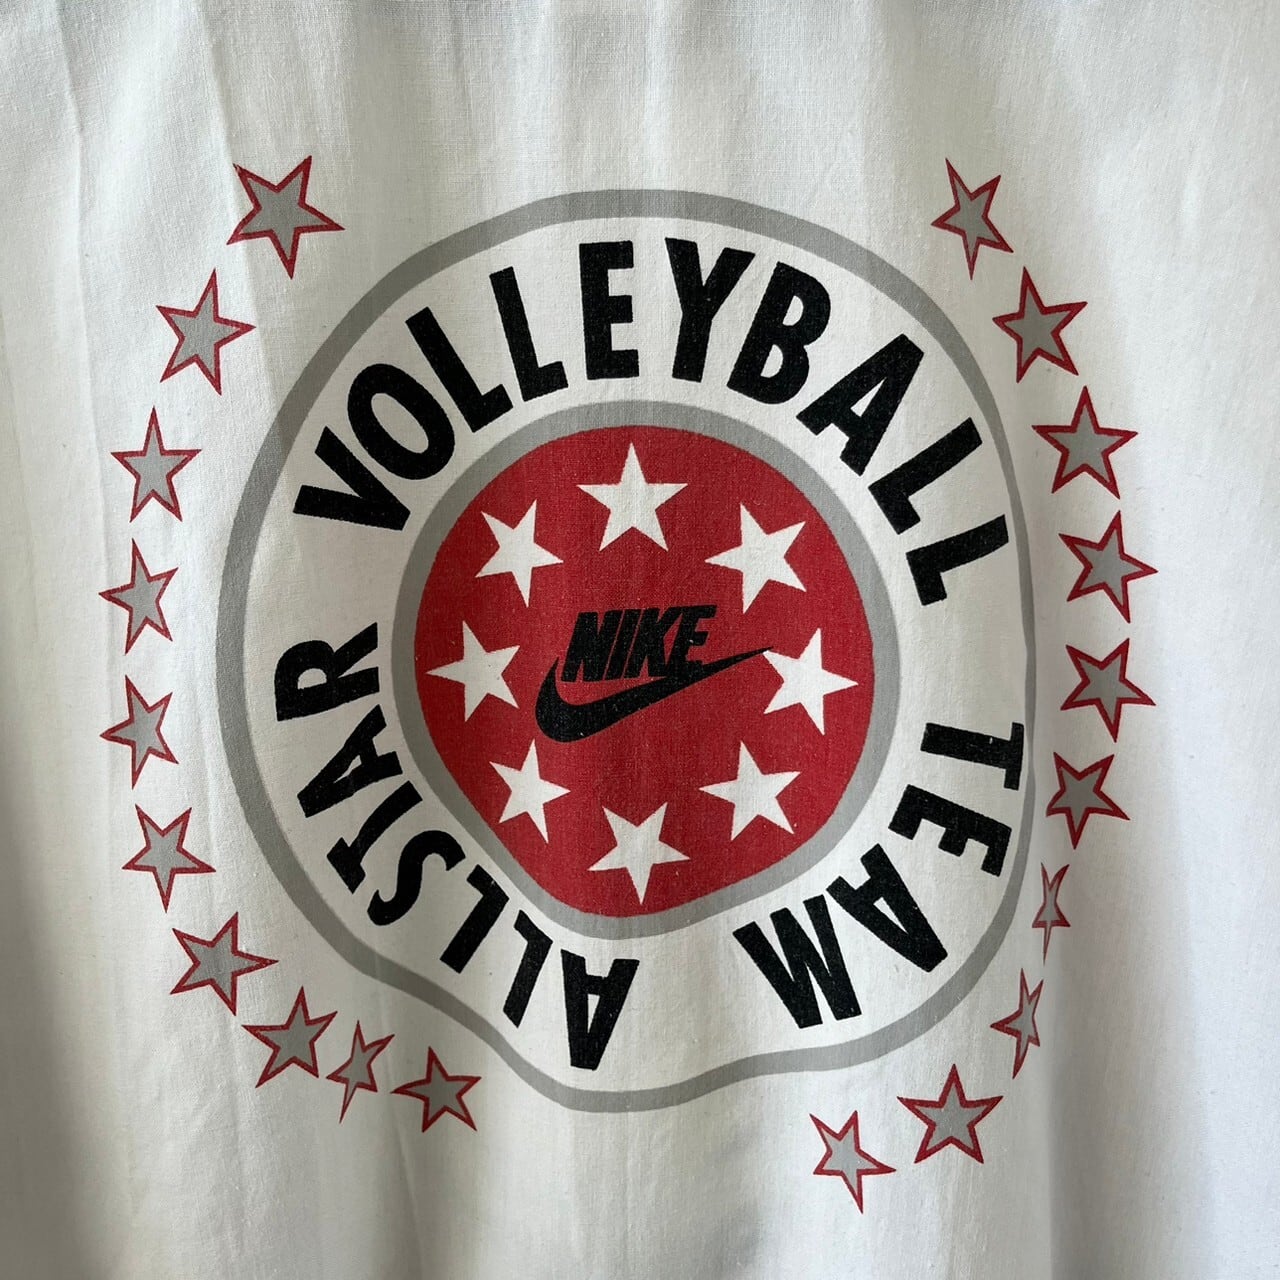 90s NIKE volleyball